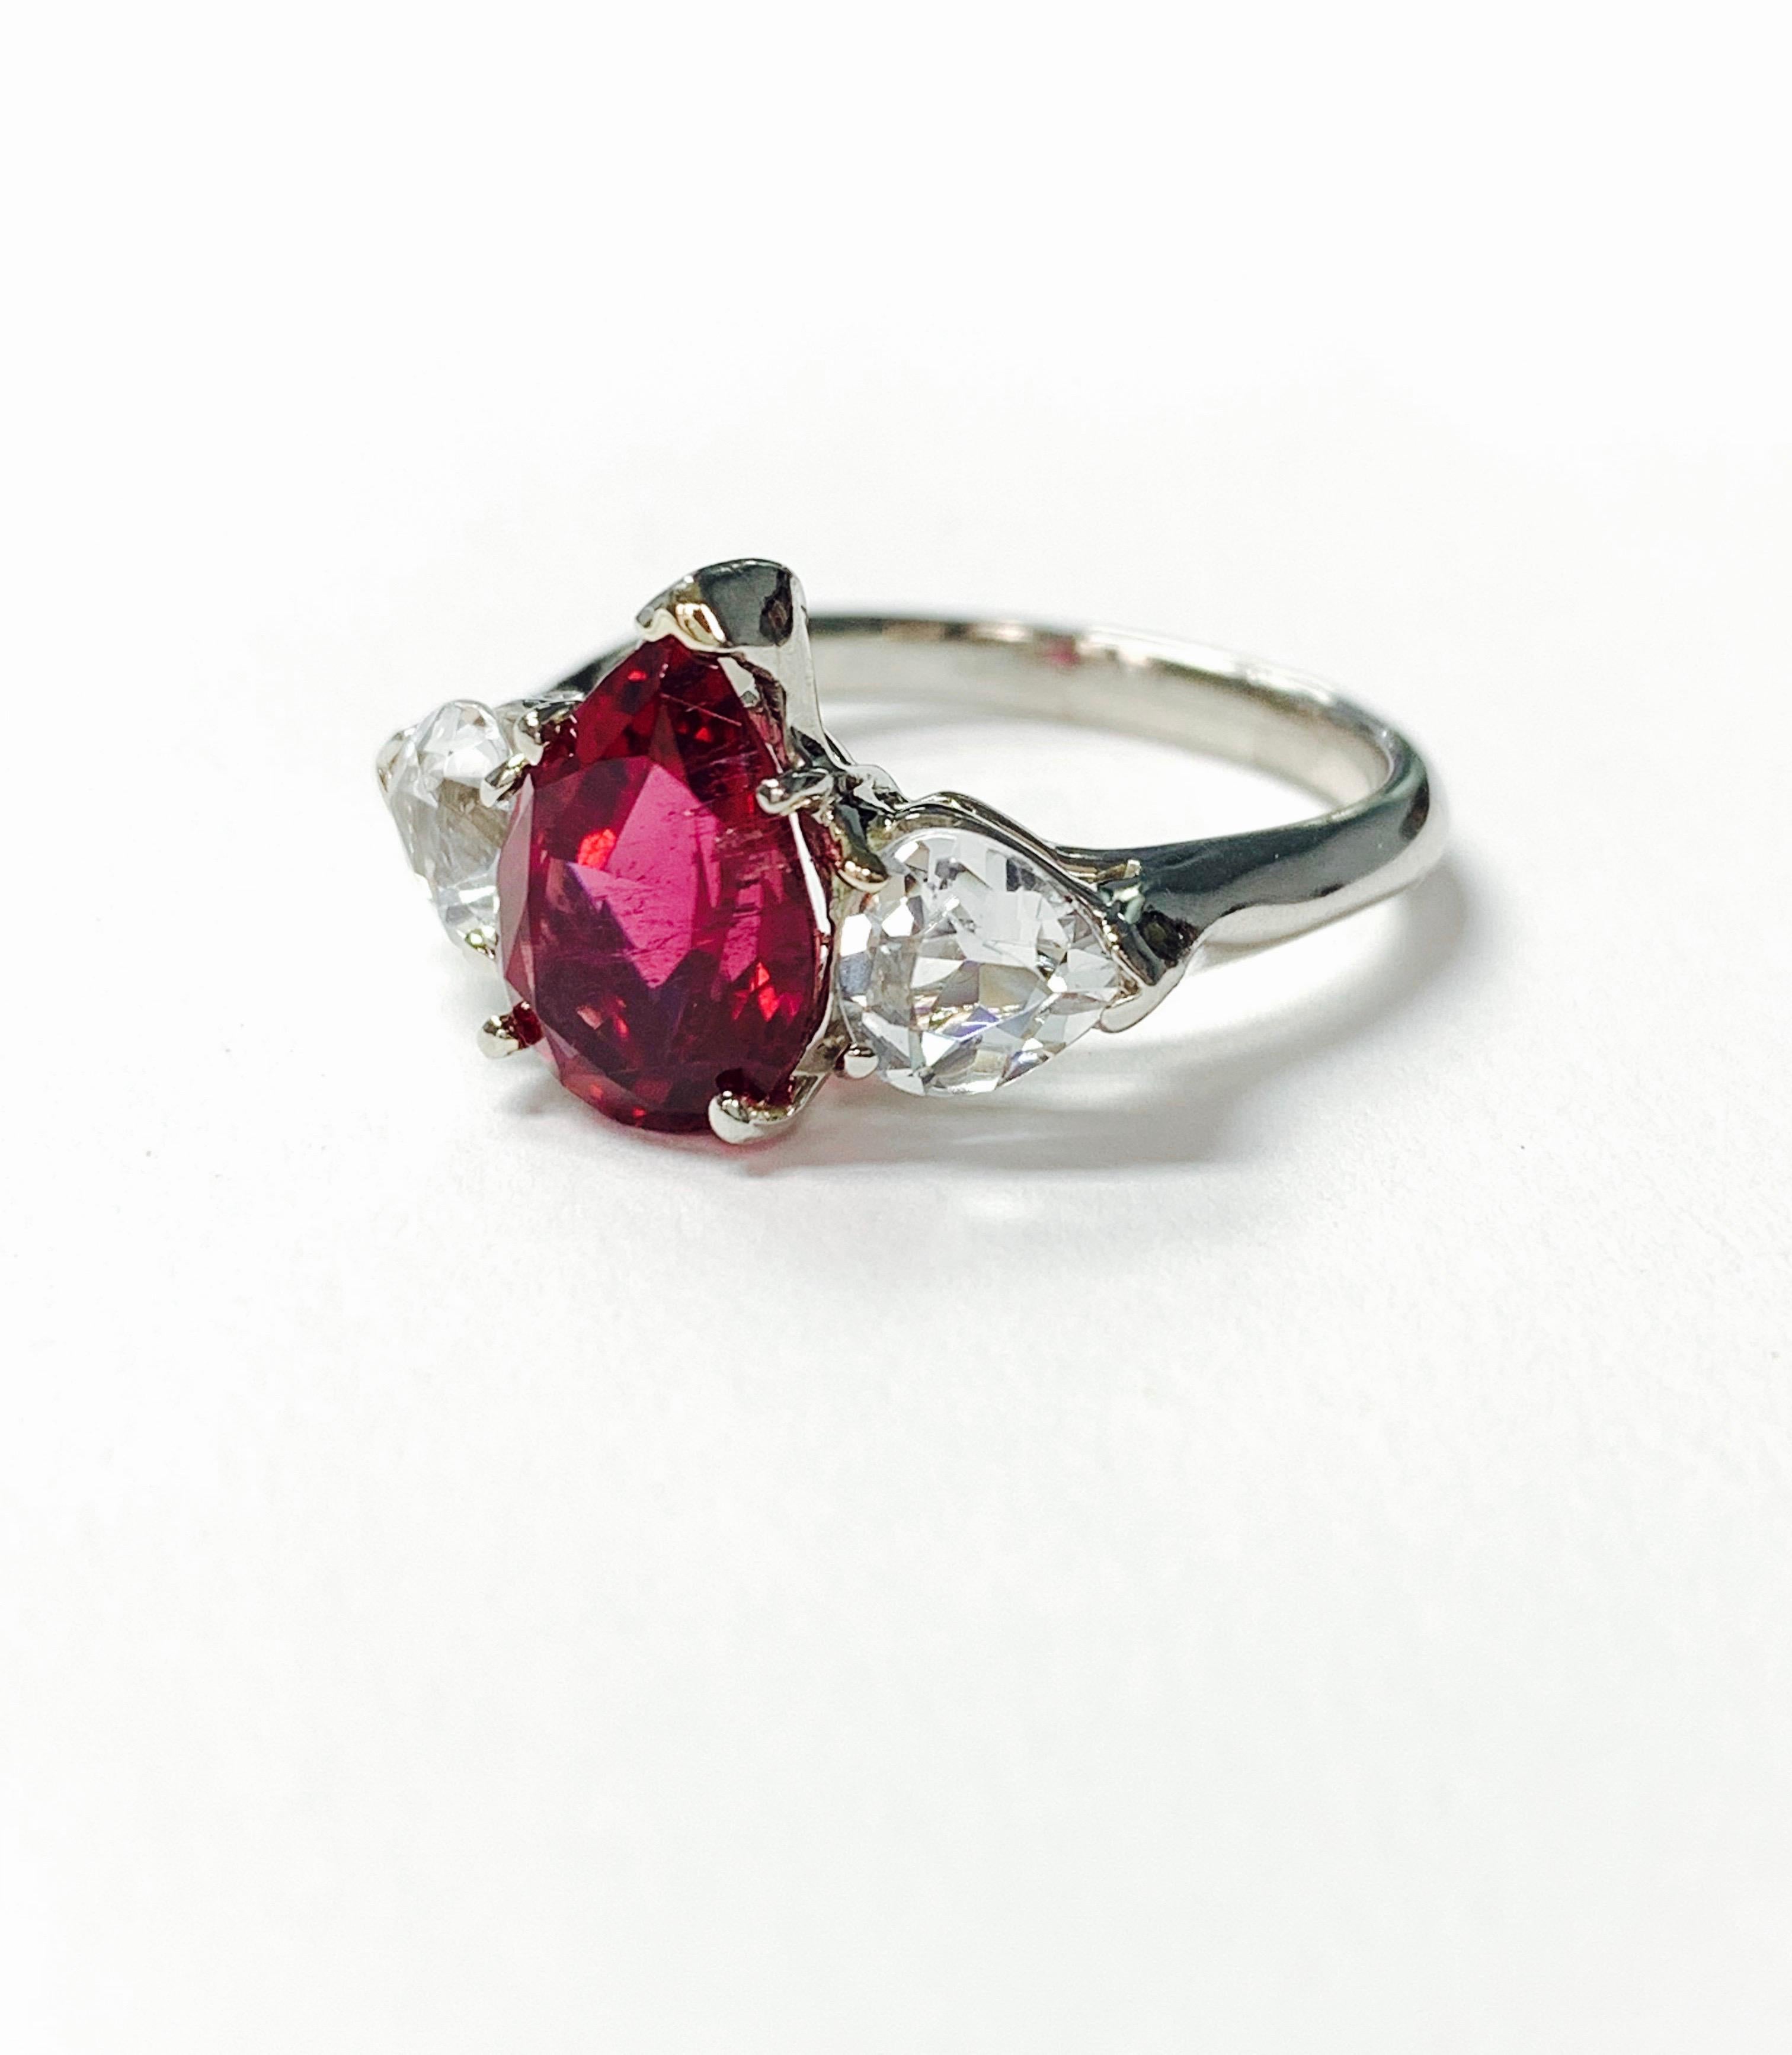 Red tourmaline pear shape and white sapphire ring hand made in platinum . 
The details are as follows : 
Pear shape tourmaline weight : 2.5 carat 
White sapphire weight : 1.5 carat 
Metal ; platinum 
